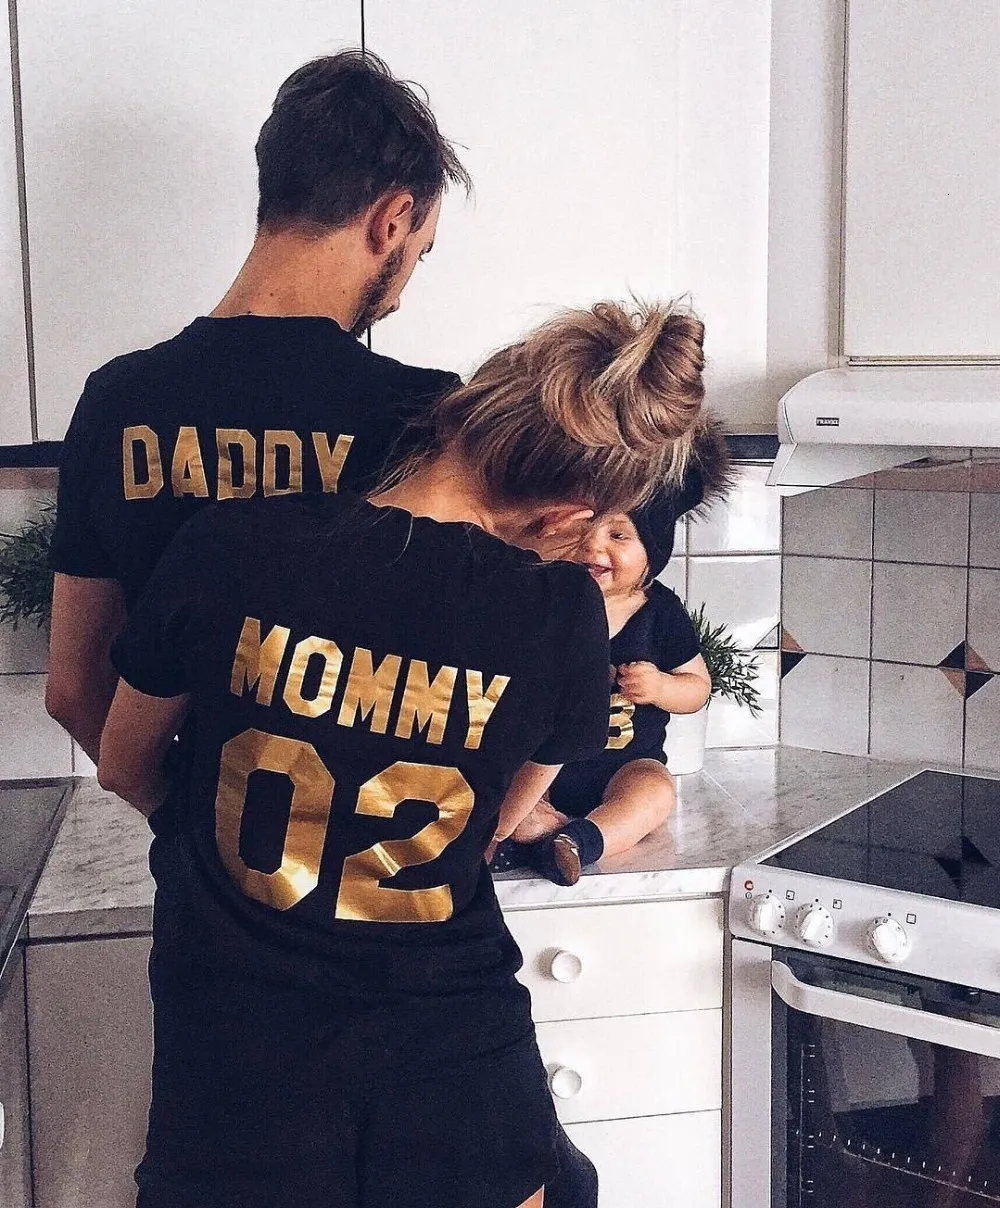 Family Matching Outfits Family Matching Clothes Family Look Cotton T-shirt DADDY MOMMY KID BABY Funny Letter Print Number Tops Tees Summer 230628